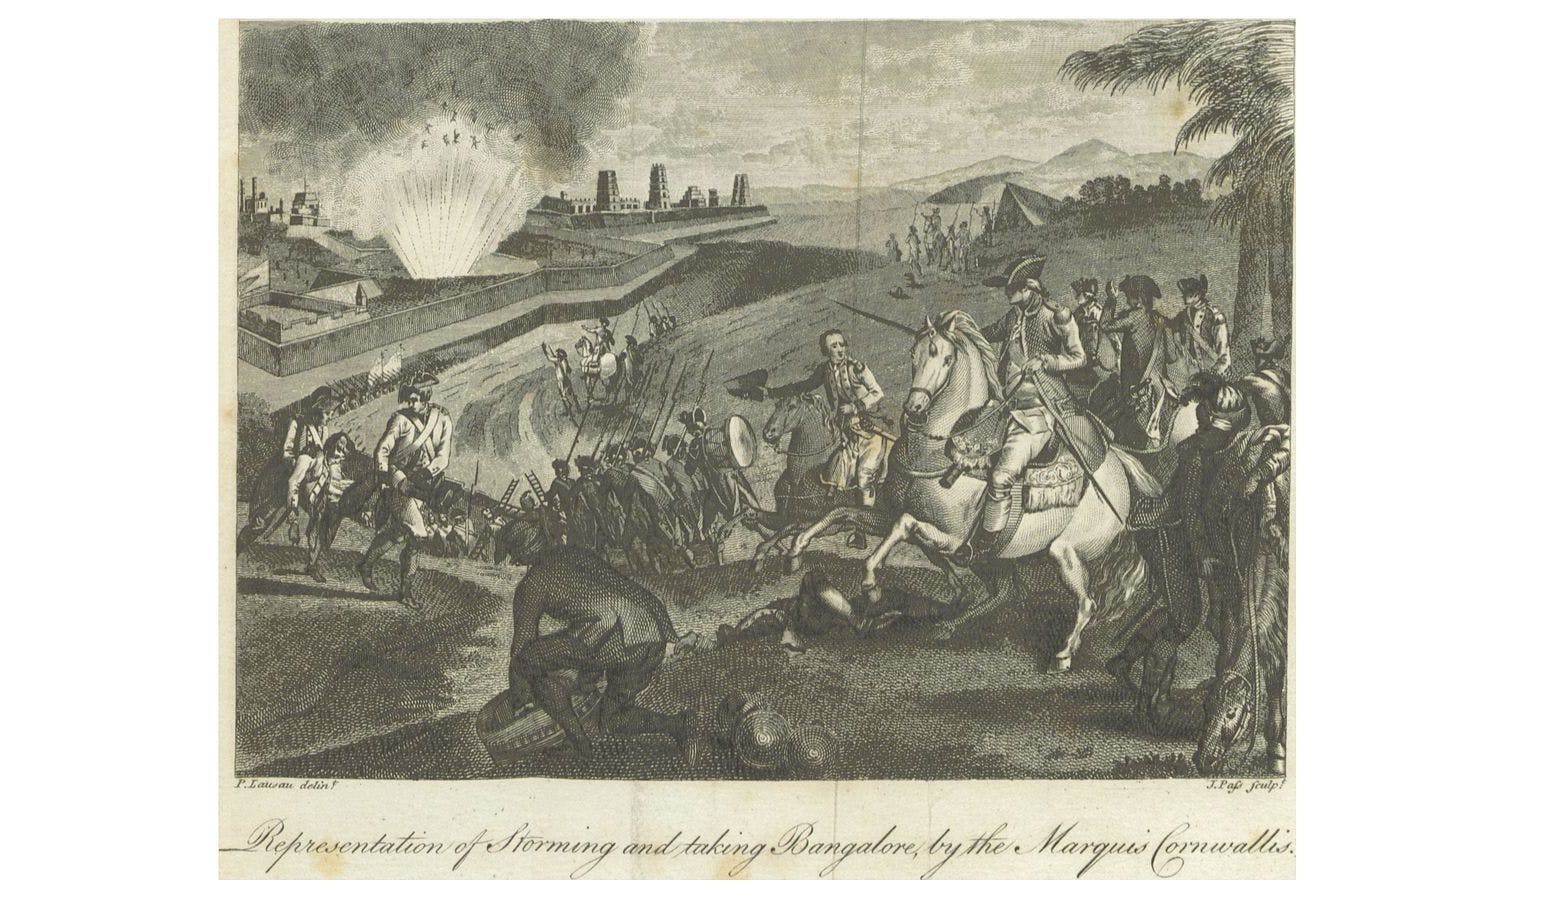 Storming of Bangalore Fort by Lord Cornwallis